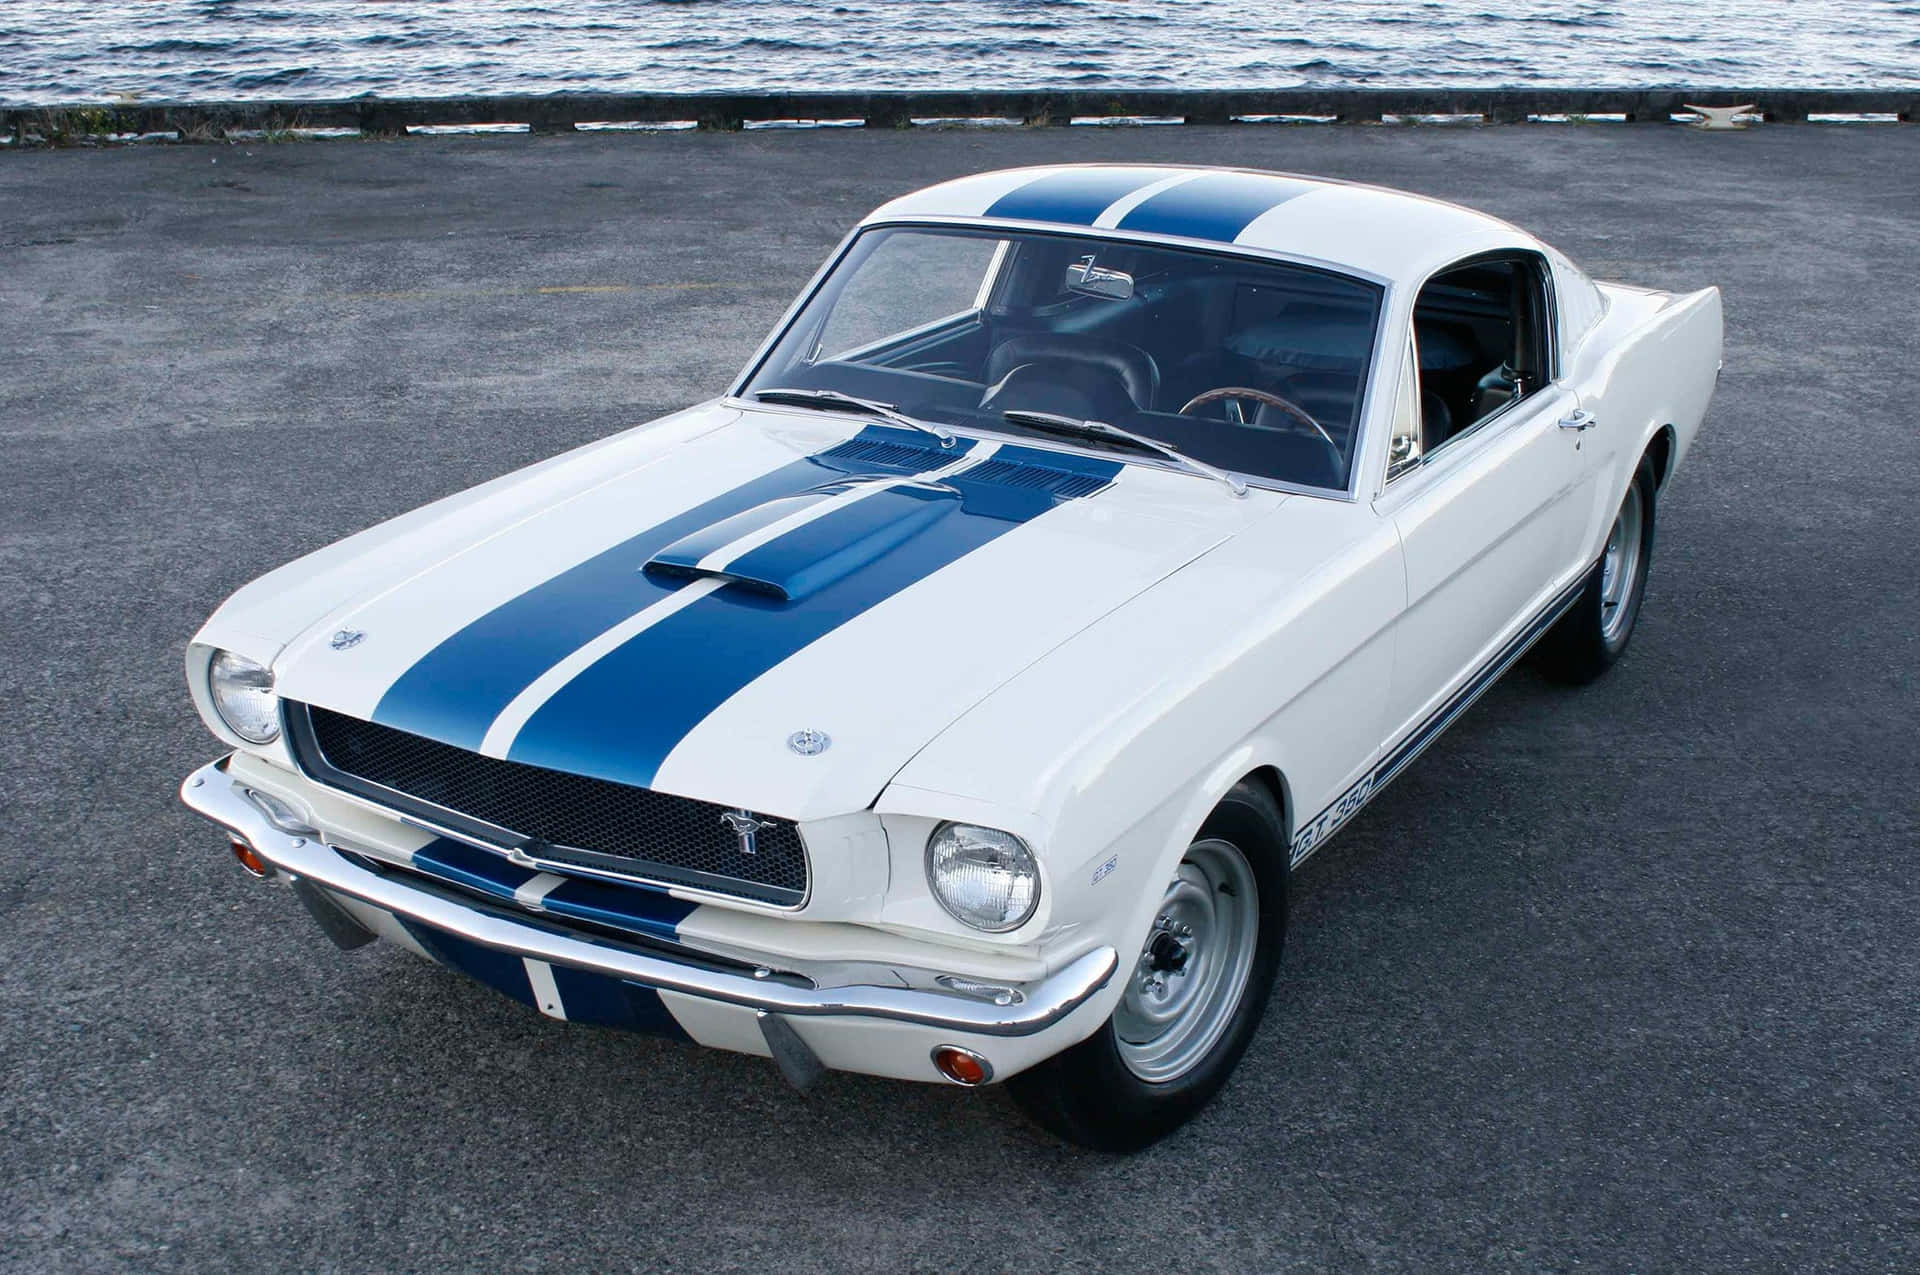 The Mustang - The Iconic American Muscle Car